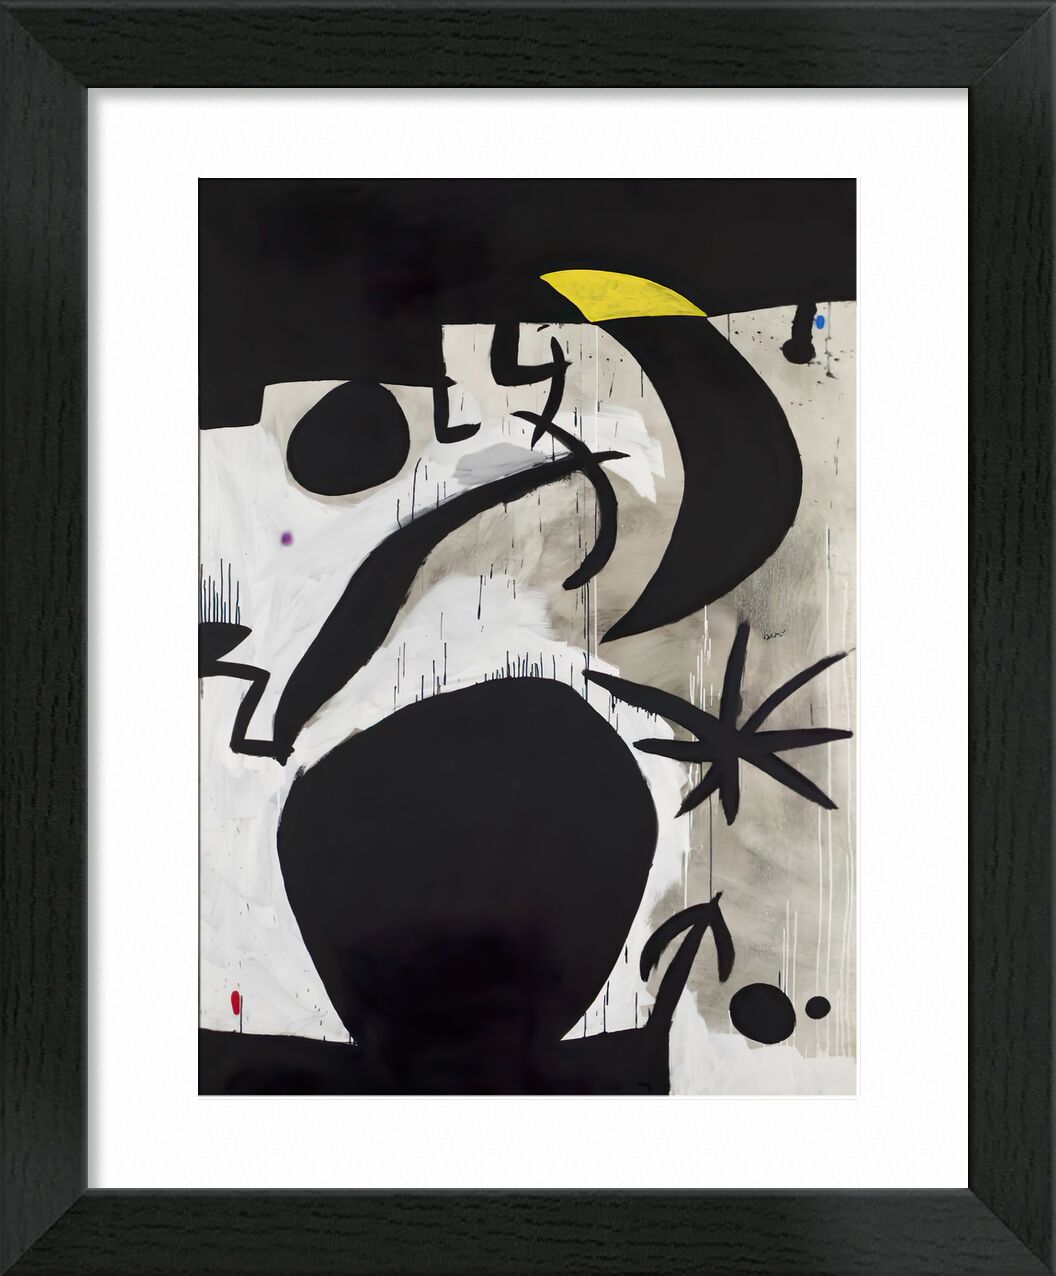 Women and Birds in the Night, 1969 - 1974 - Joan Miró from Fine Art, Prodi Art, abstract, painting, Joan Miró, star, bird, woman, poster